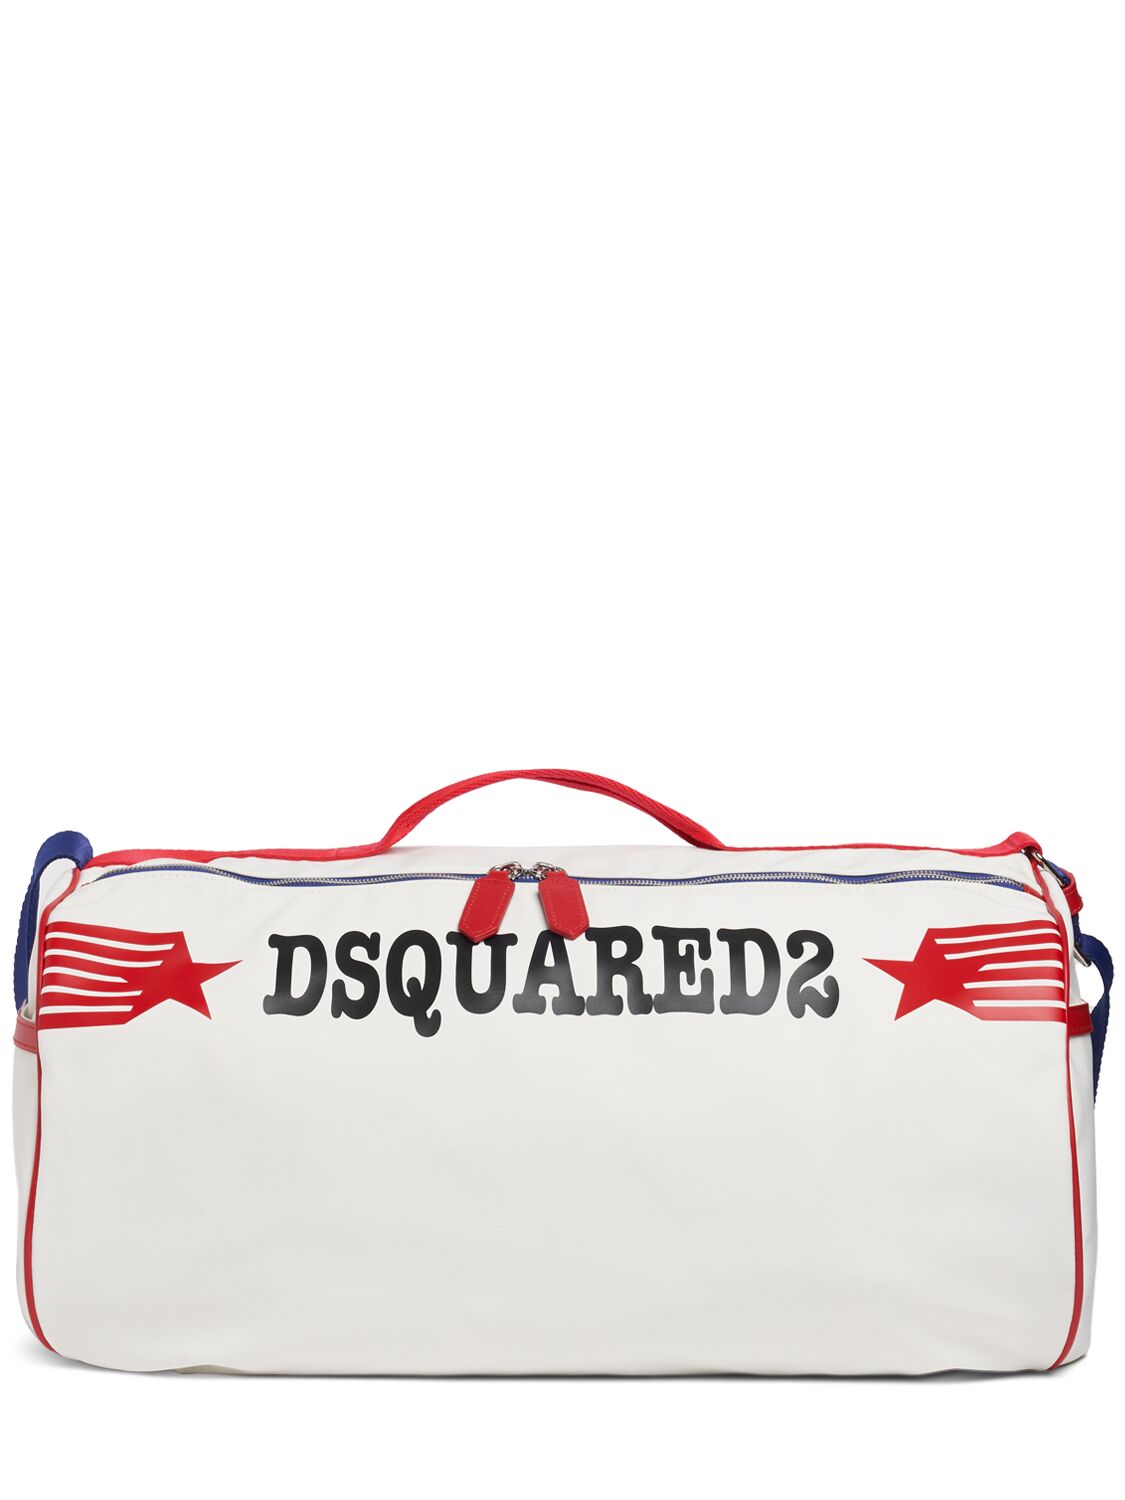 Dsquared2 Rocco  Duffle Bag In White